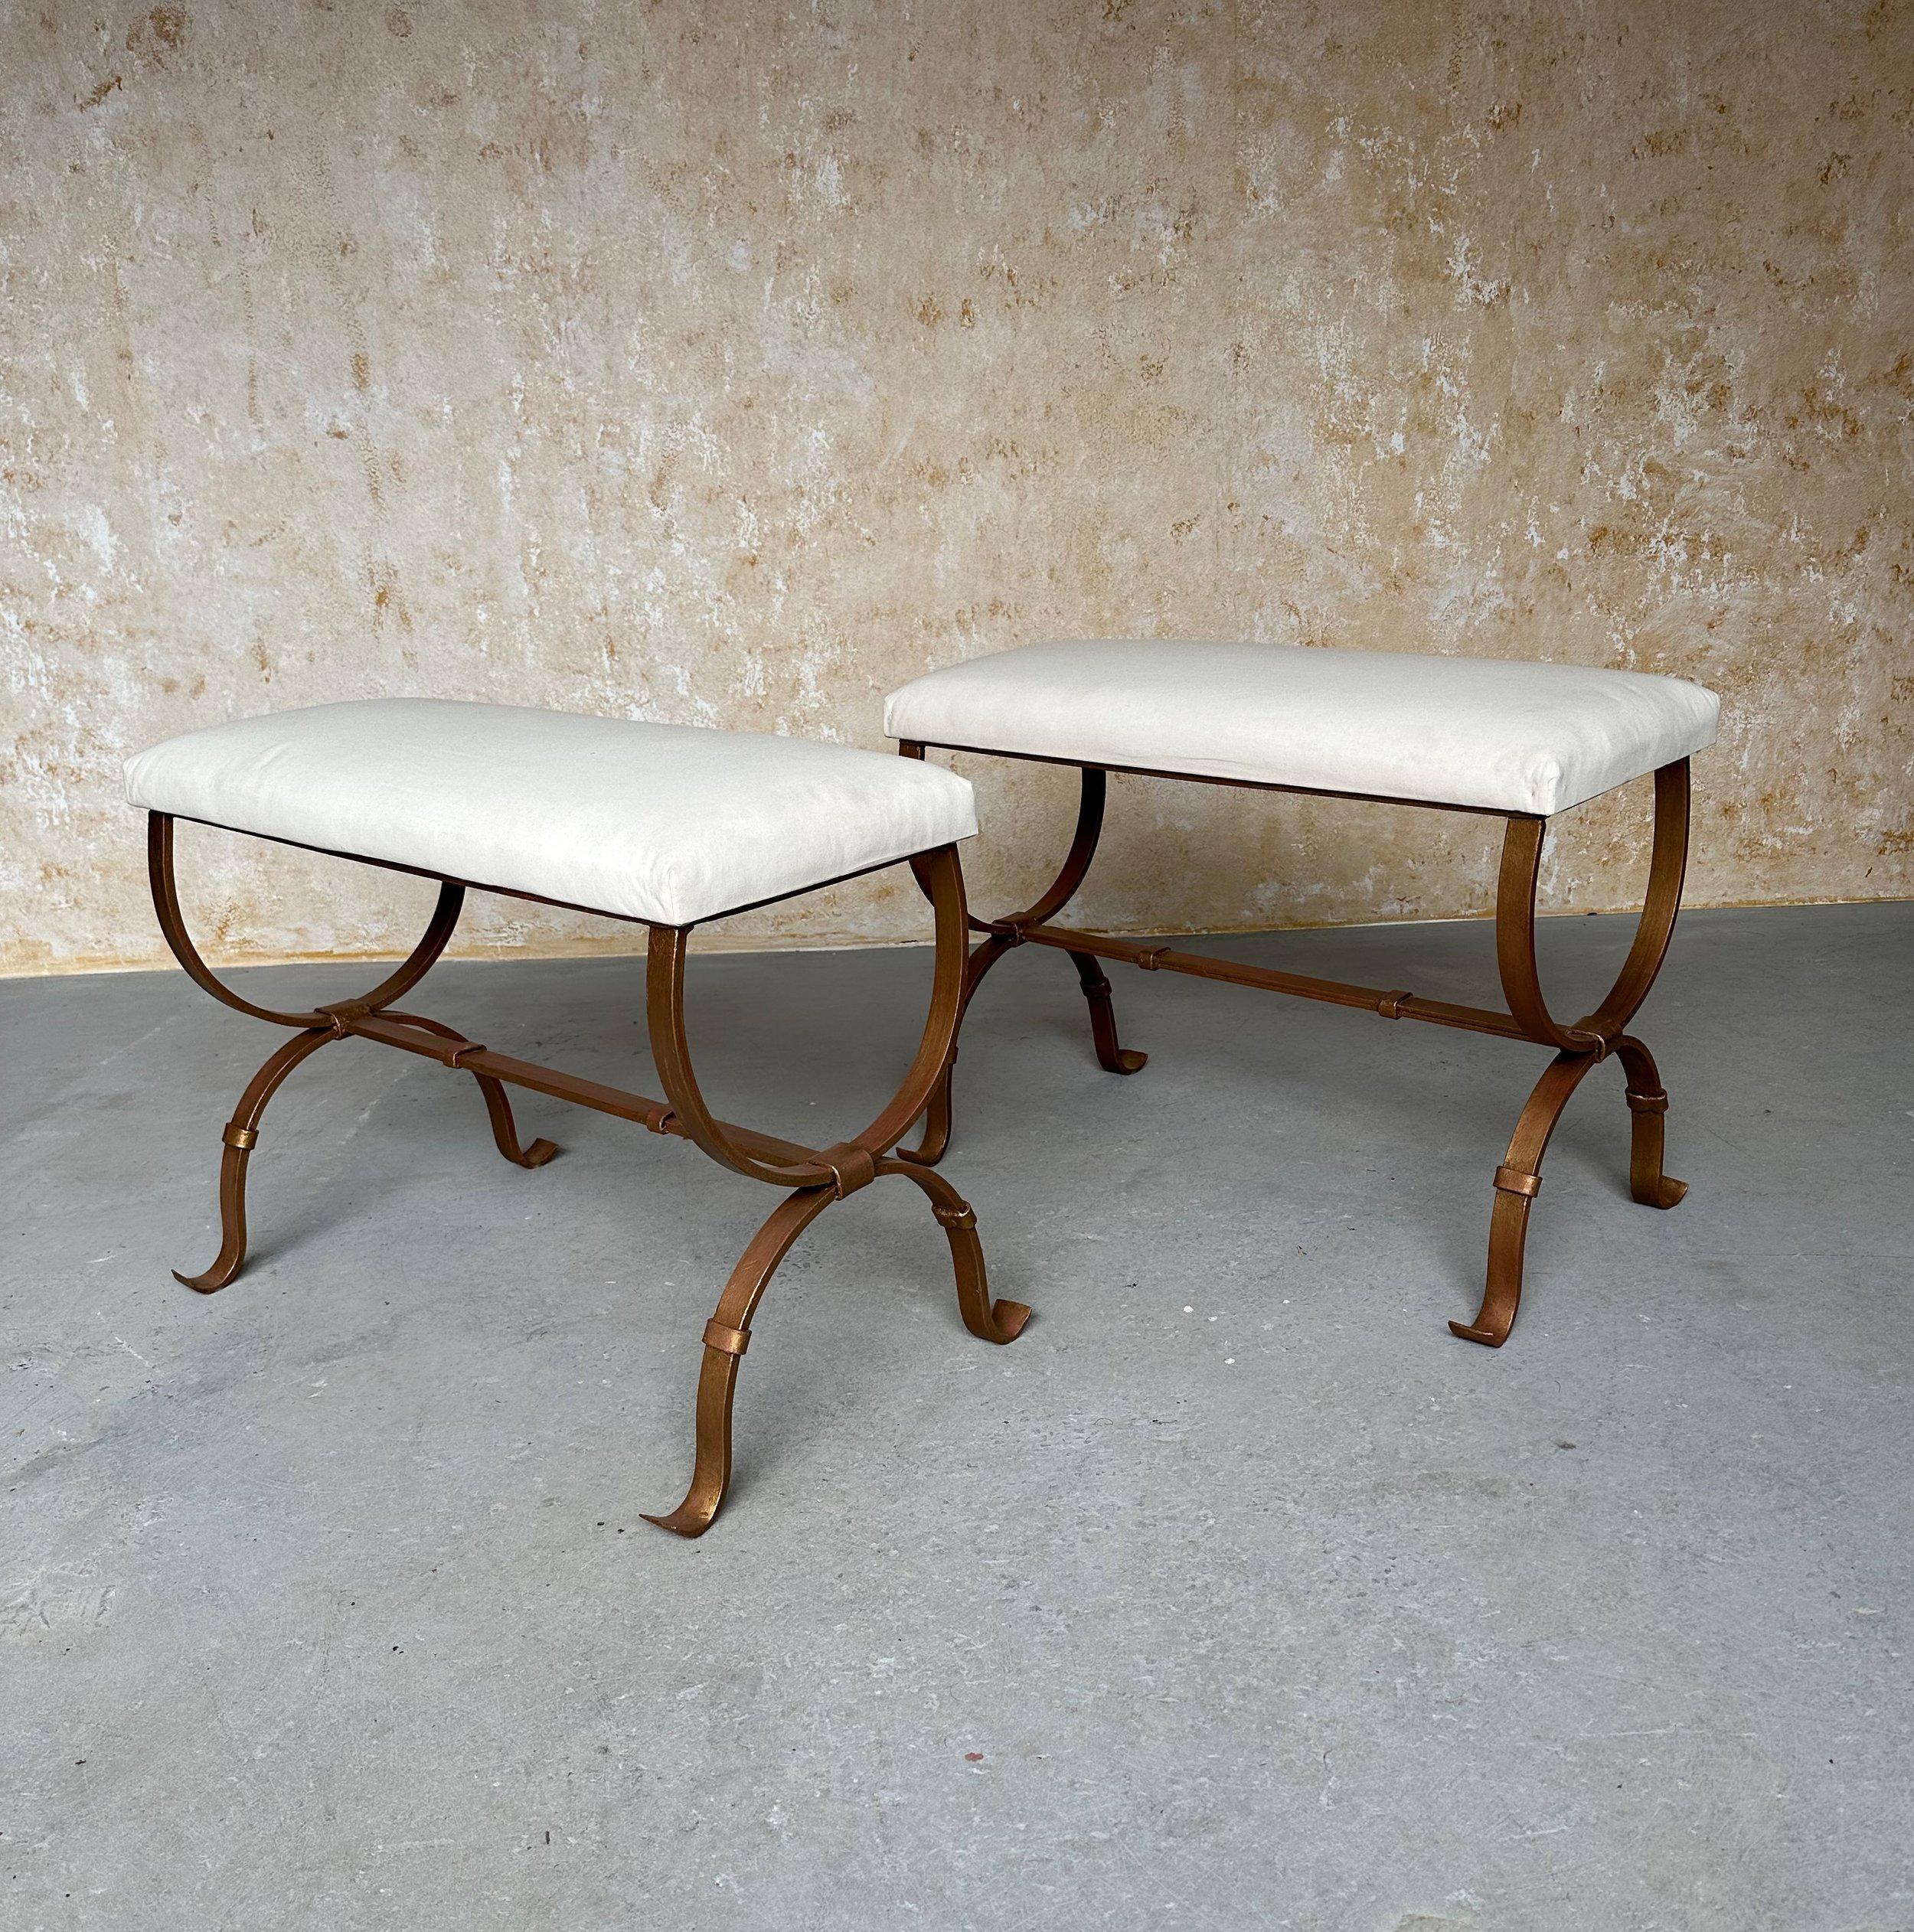 This elegant pair of Spanish gilt iron benches was recently handcrafted by expert European artisans using traditional iron-working techniques. The hand forged iron bases have central stretchers and gently curved feet with decorative band details